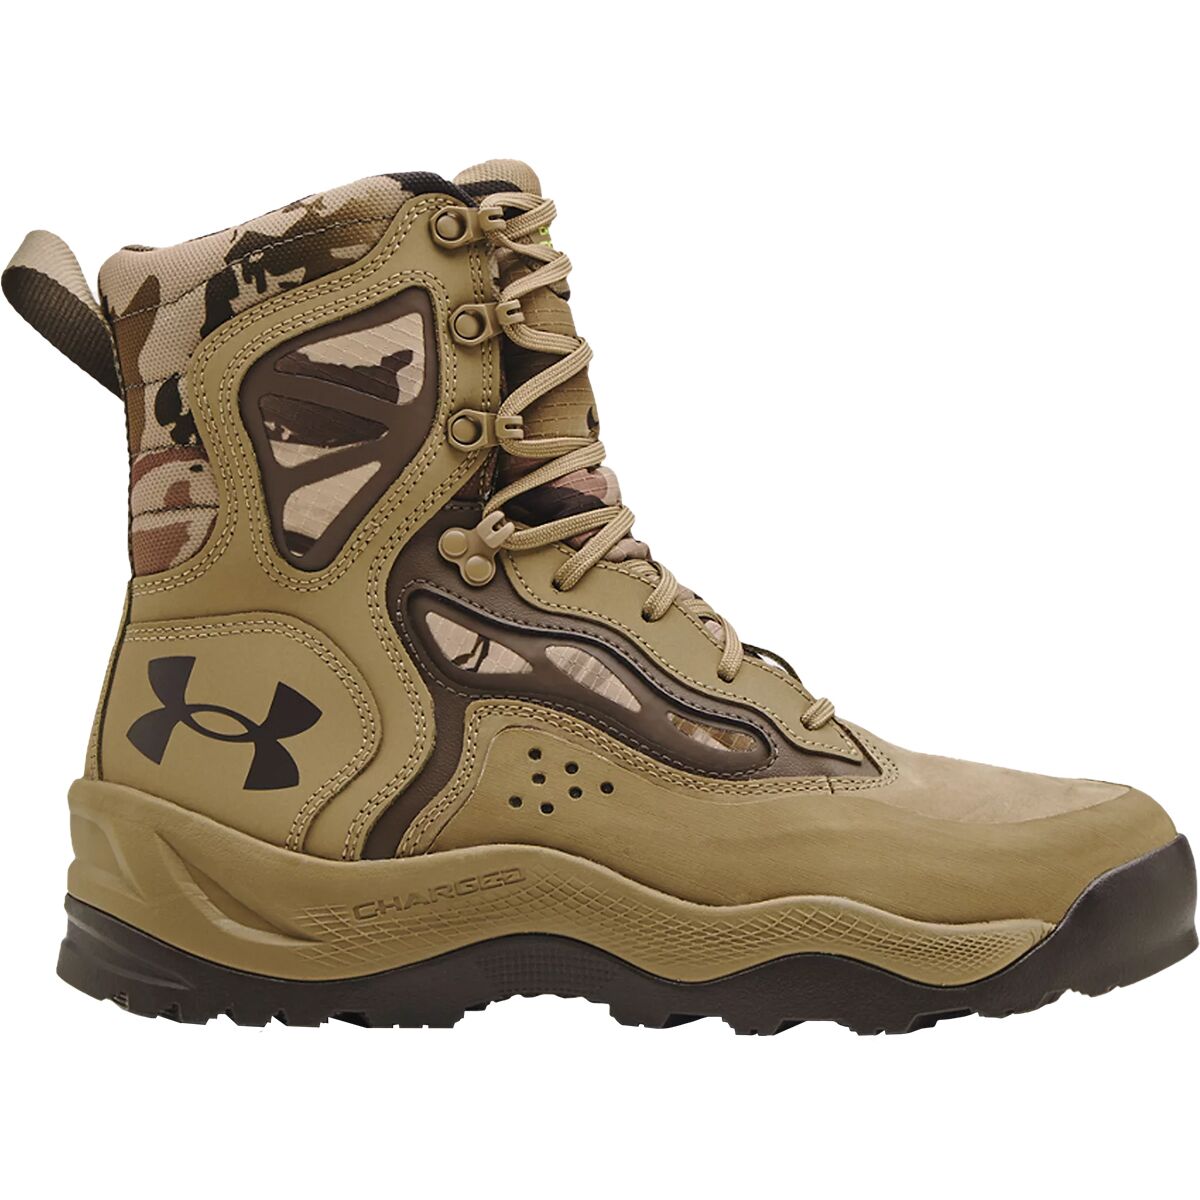 Under Armour Charged Raider WP 600G Hiking Boot - Men's